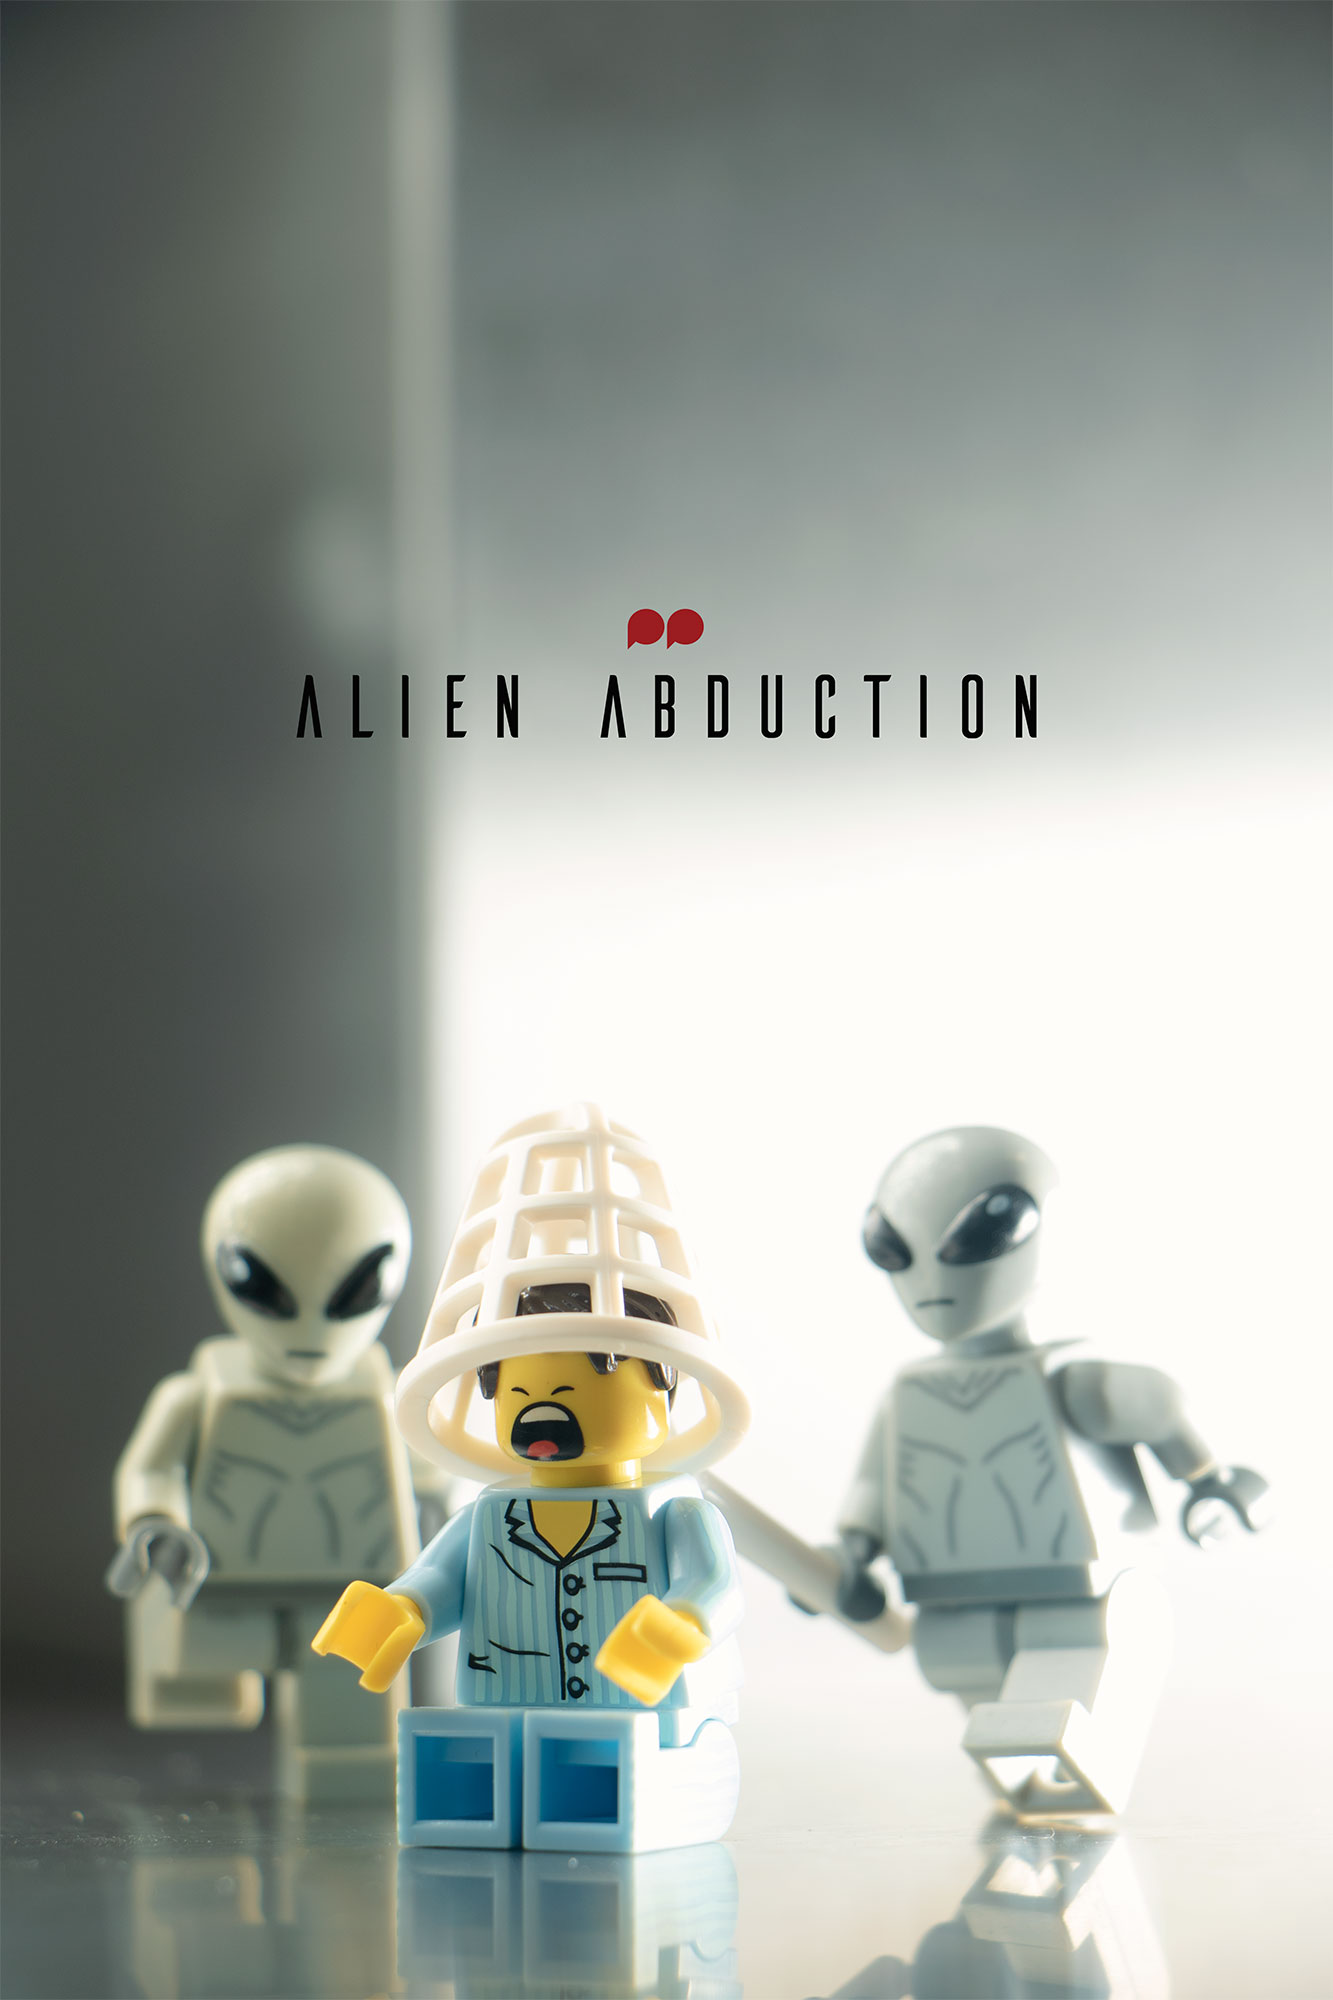 Lego Aliens with net catching a human